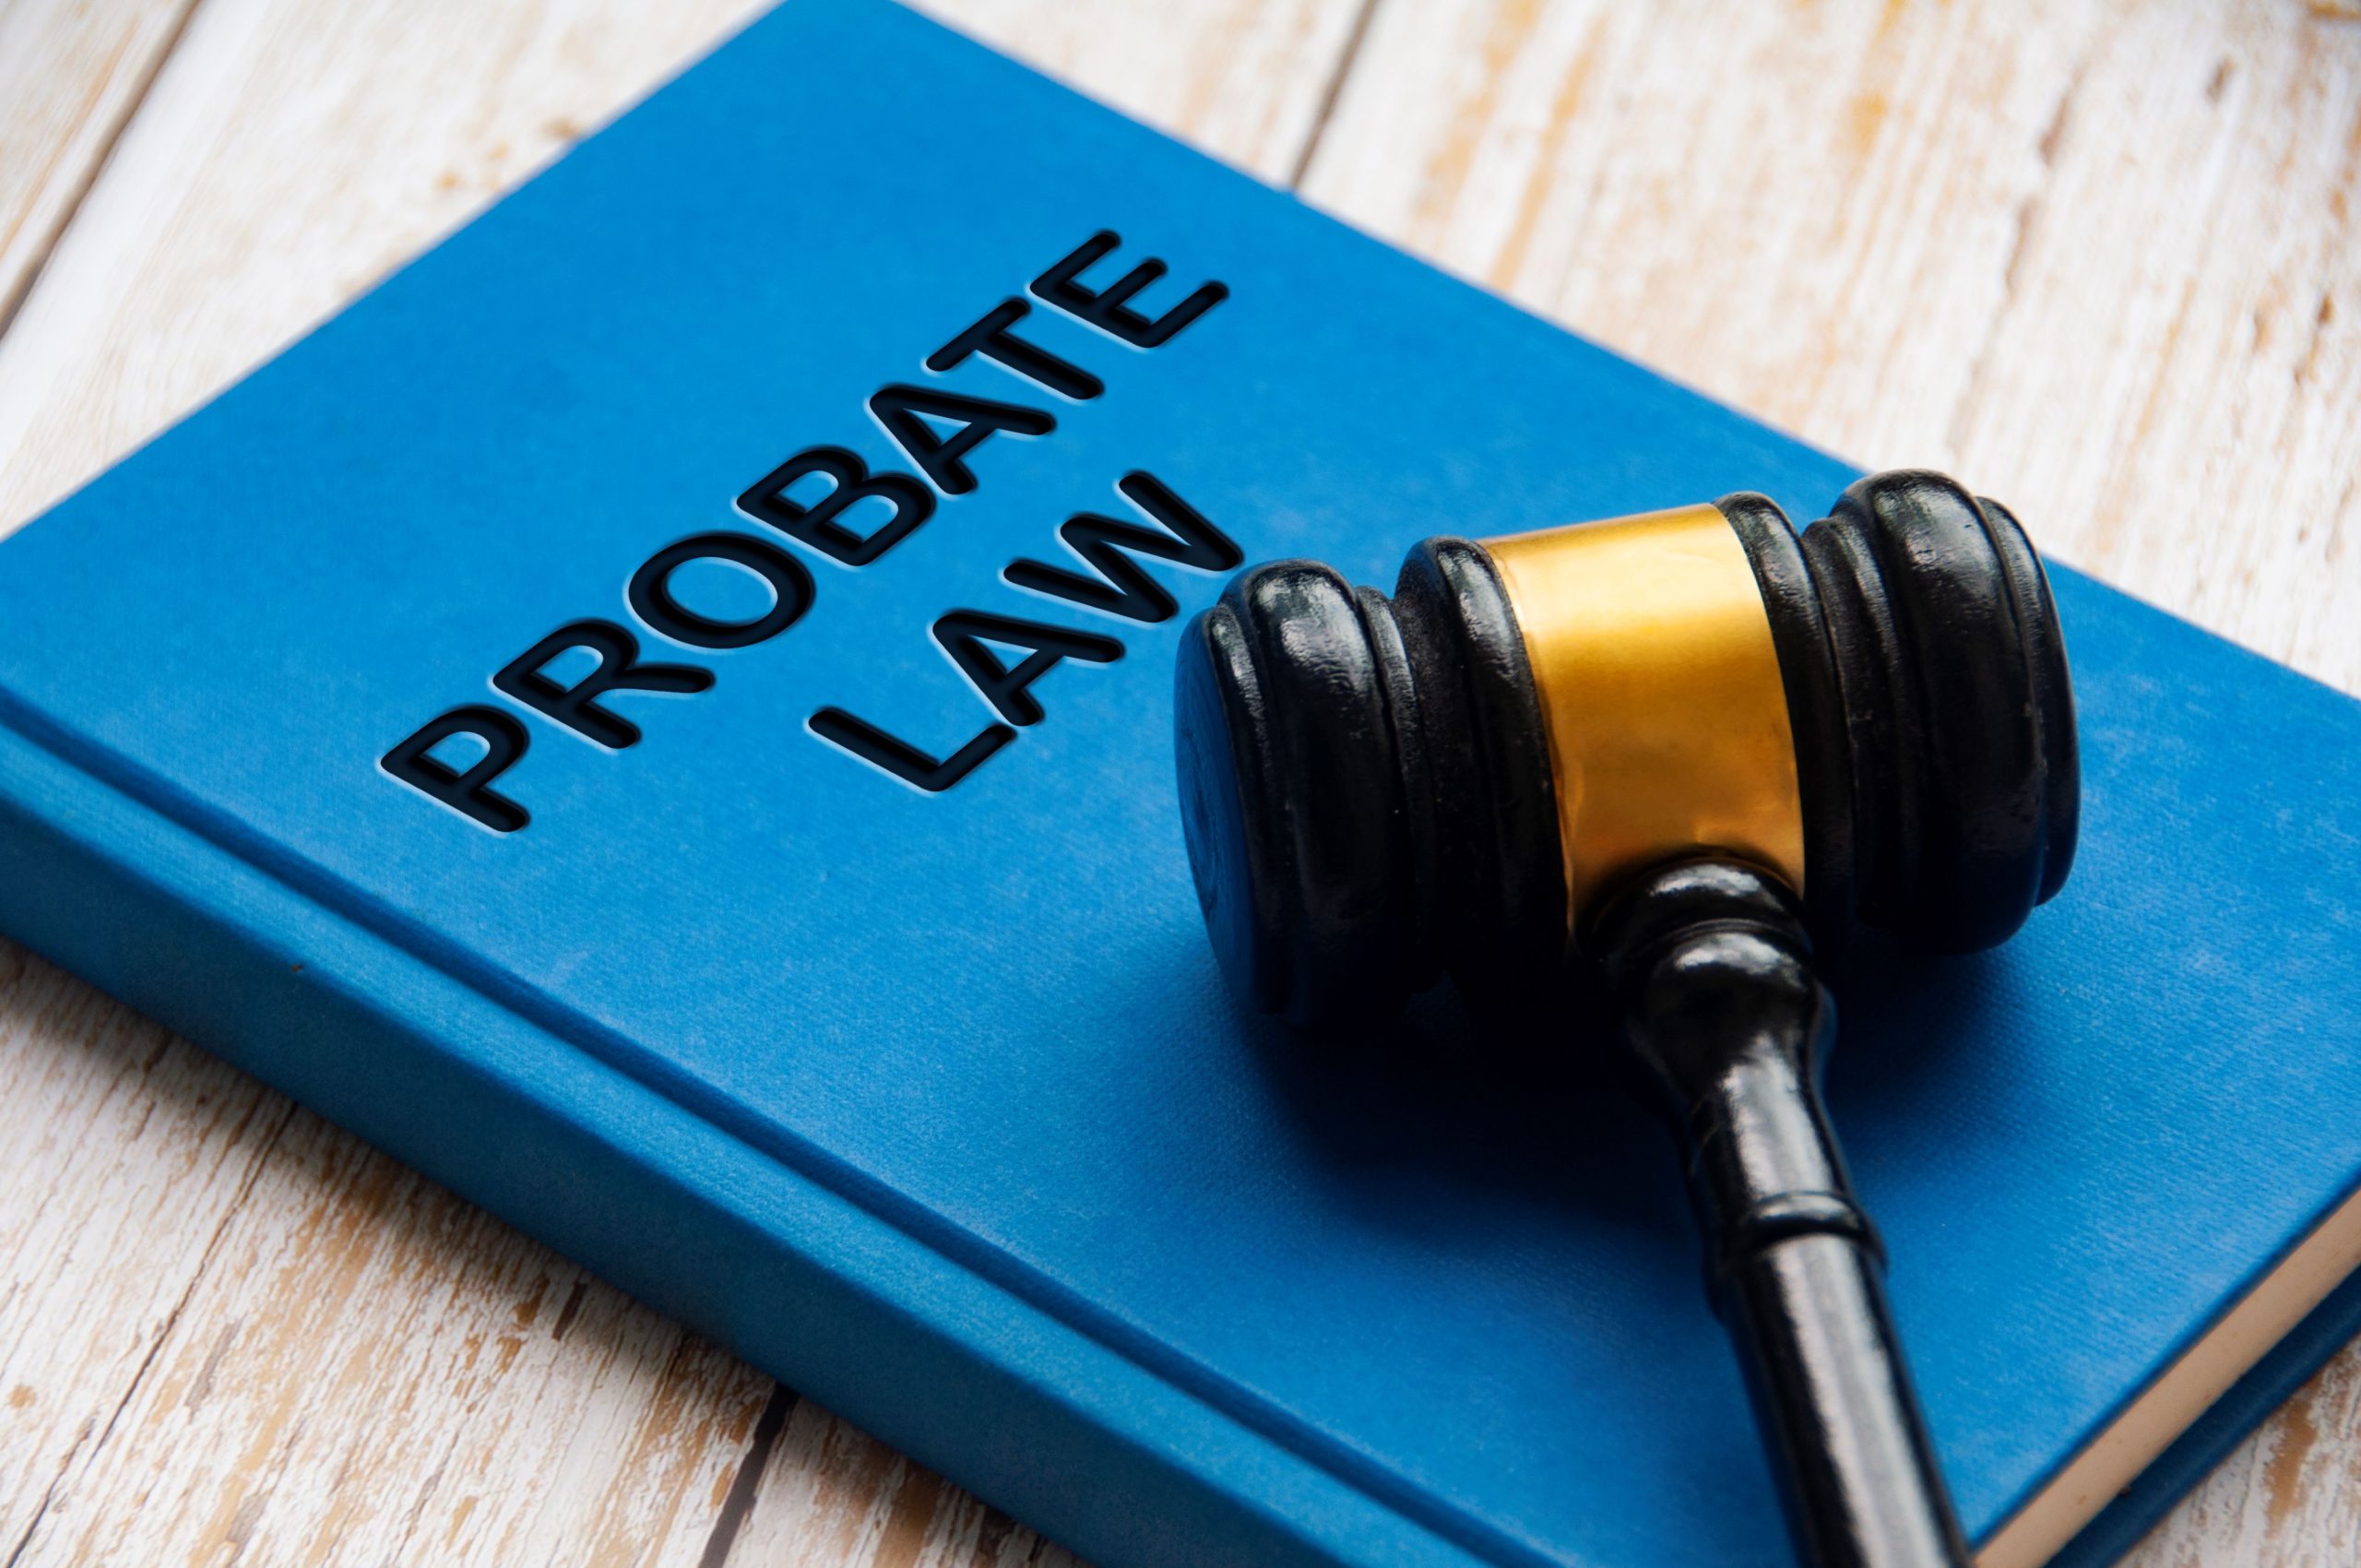 probate-law-book-with-gavel-white-background-probate-law-concept-copy-space-2-scaled.jpg